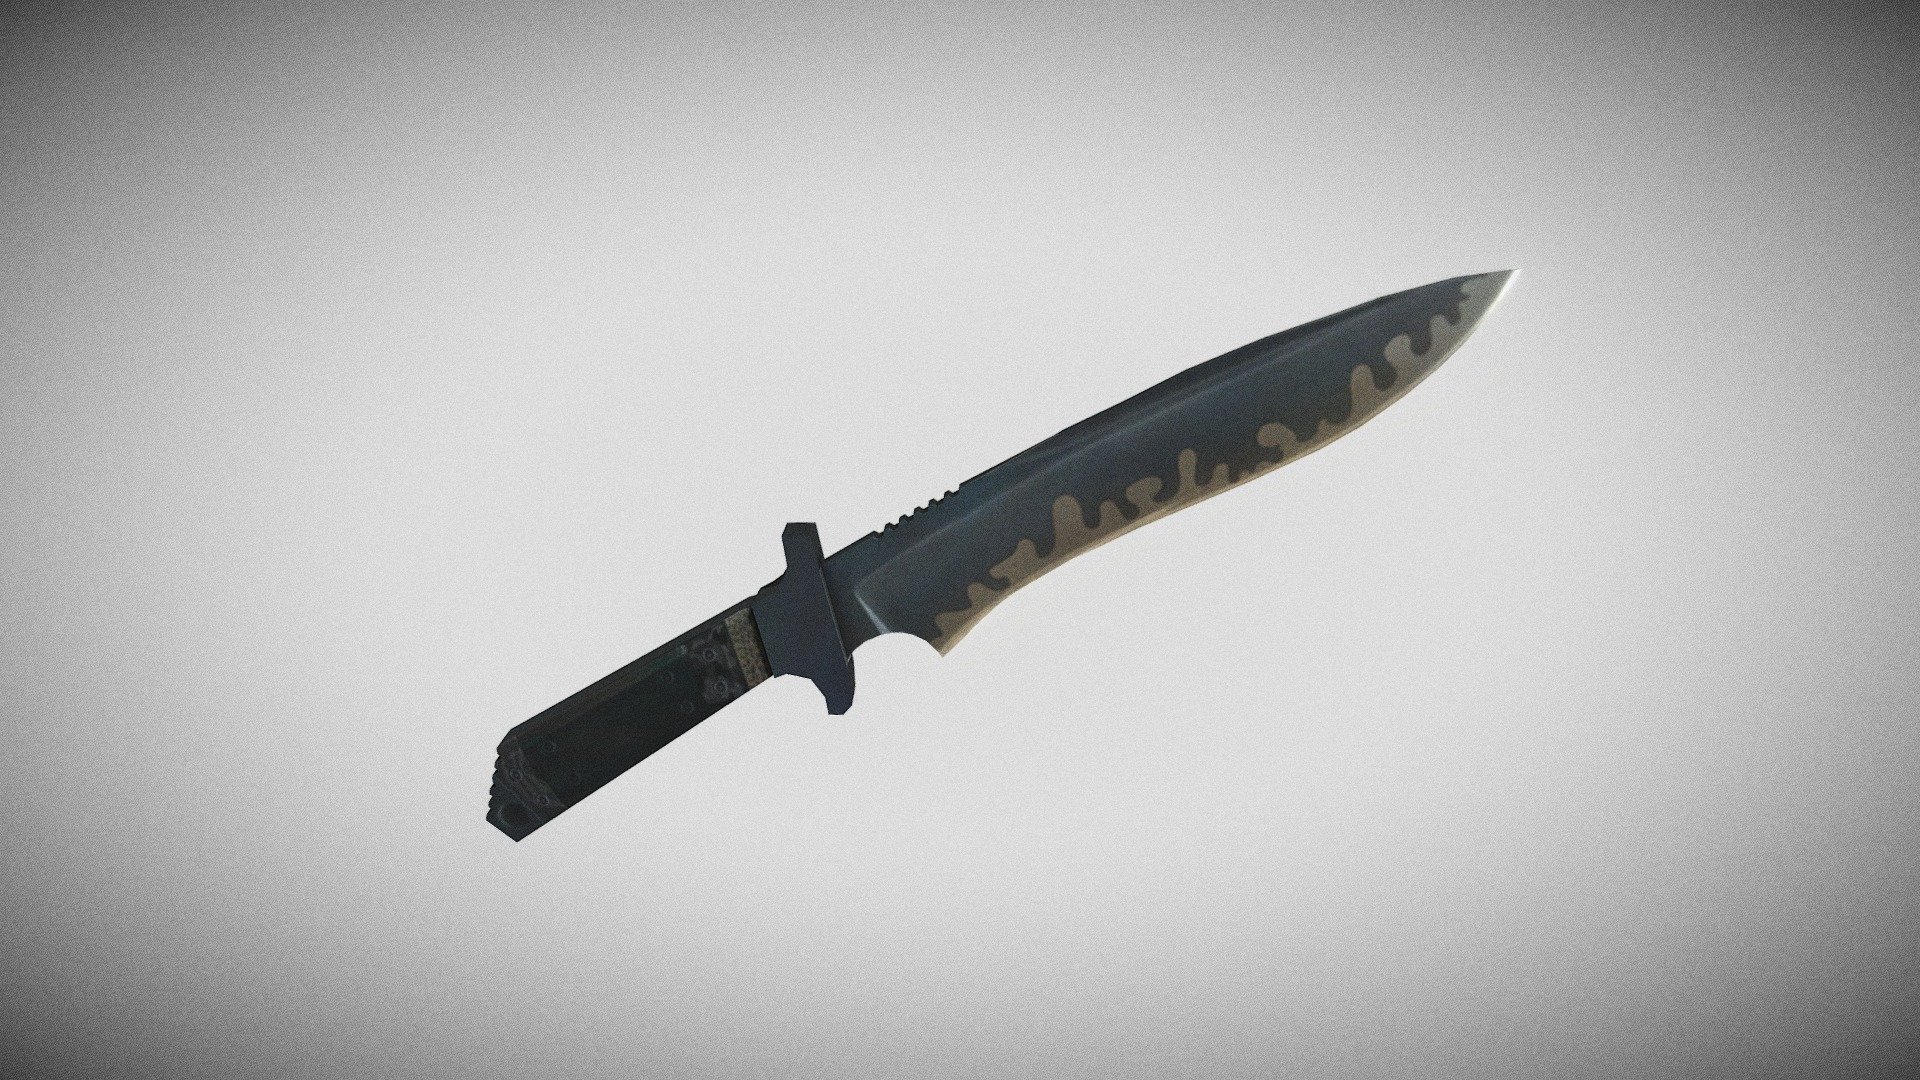 A simple model of a knife.
Knife from CS 1.6
Low-Poly.
Made in Blender 3d model